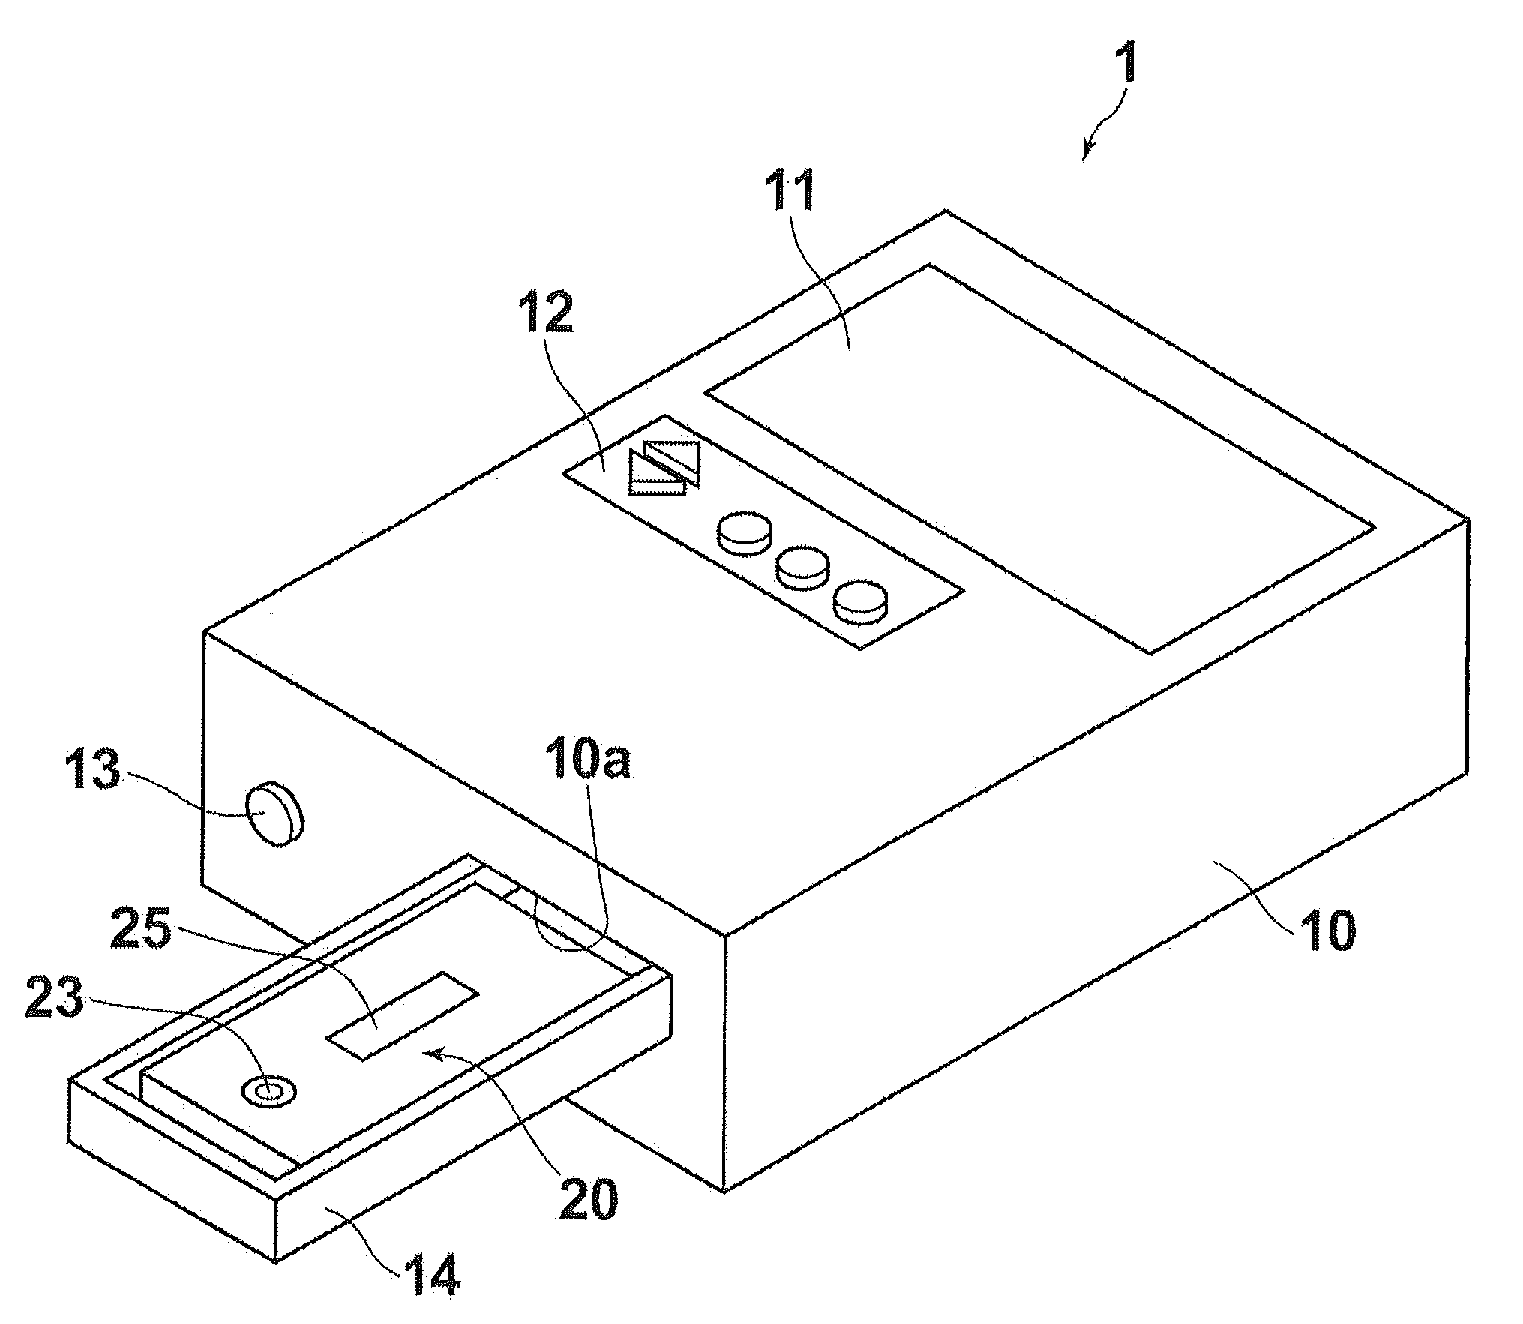 Test method and apparatus